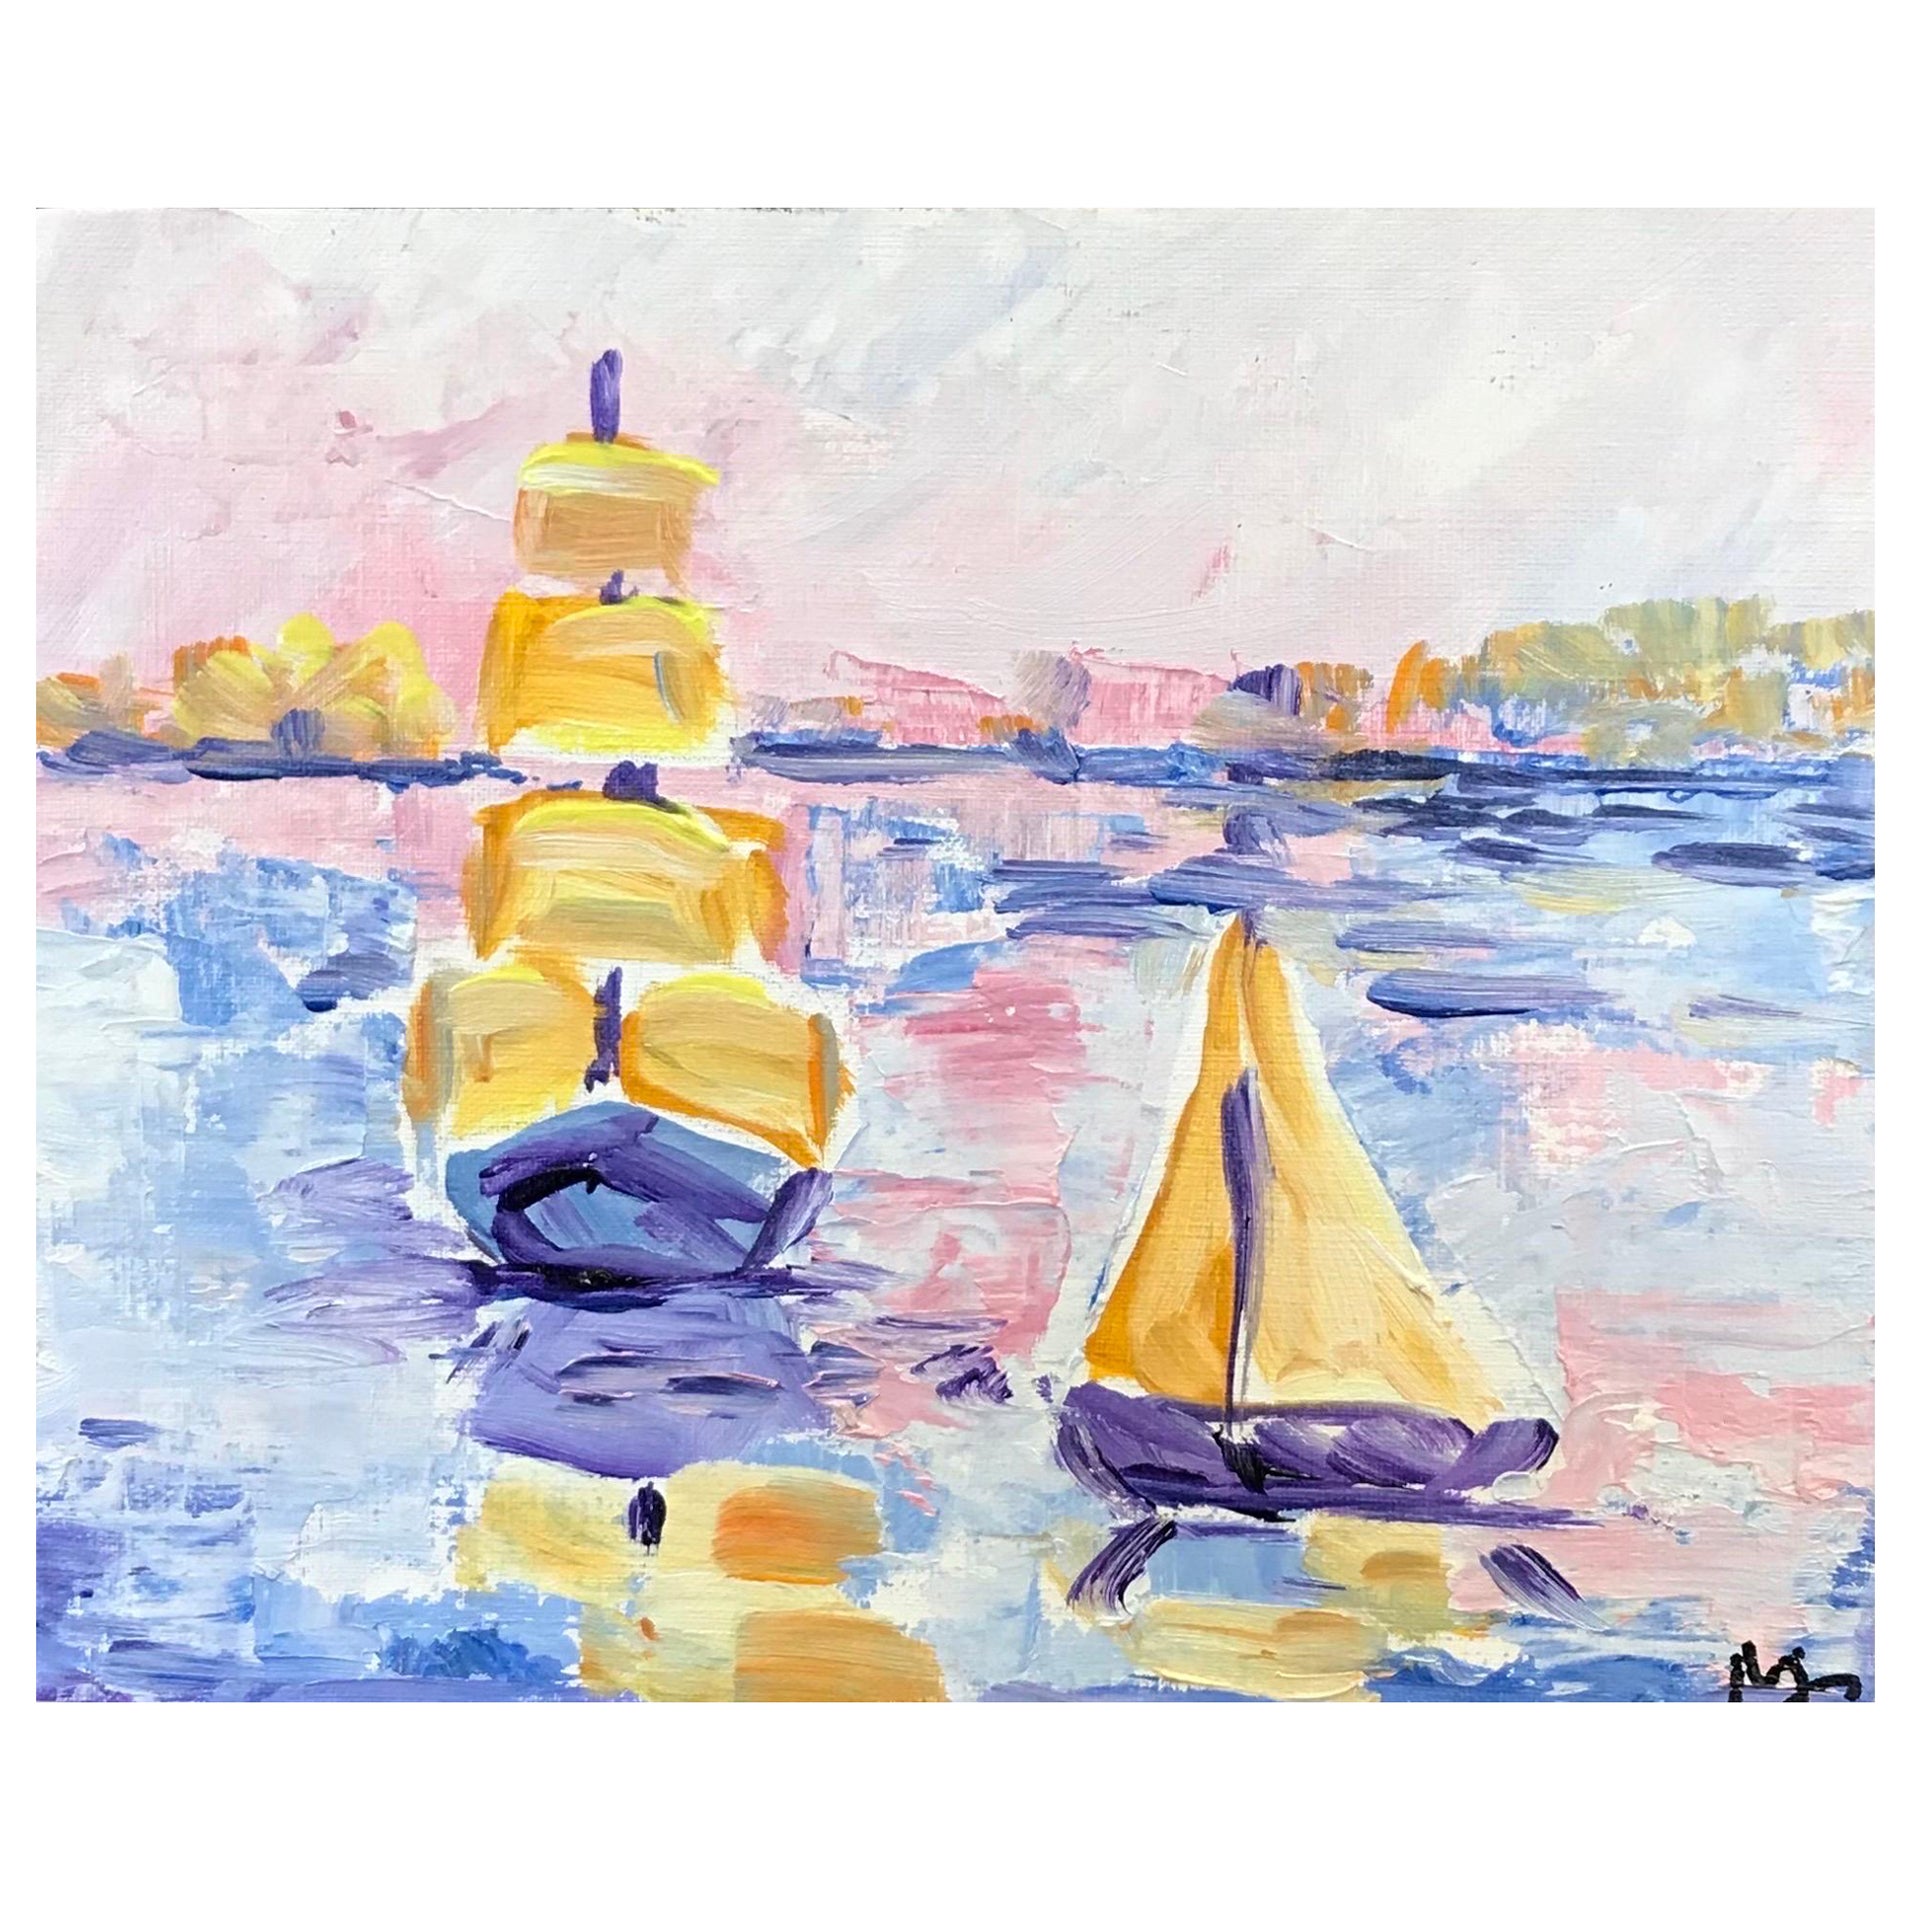 Maggy Clarysse Landscape Painting - Bright & Colorful French Impressionist Oil Painting Pastel Boat Landscape